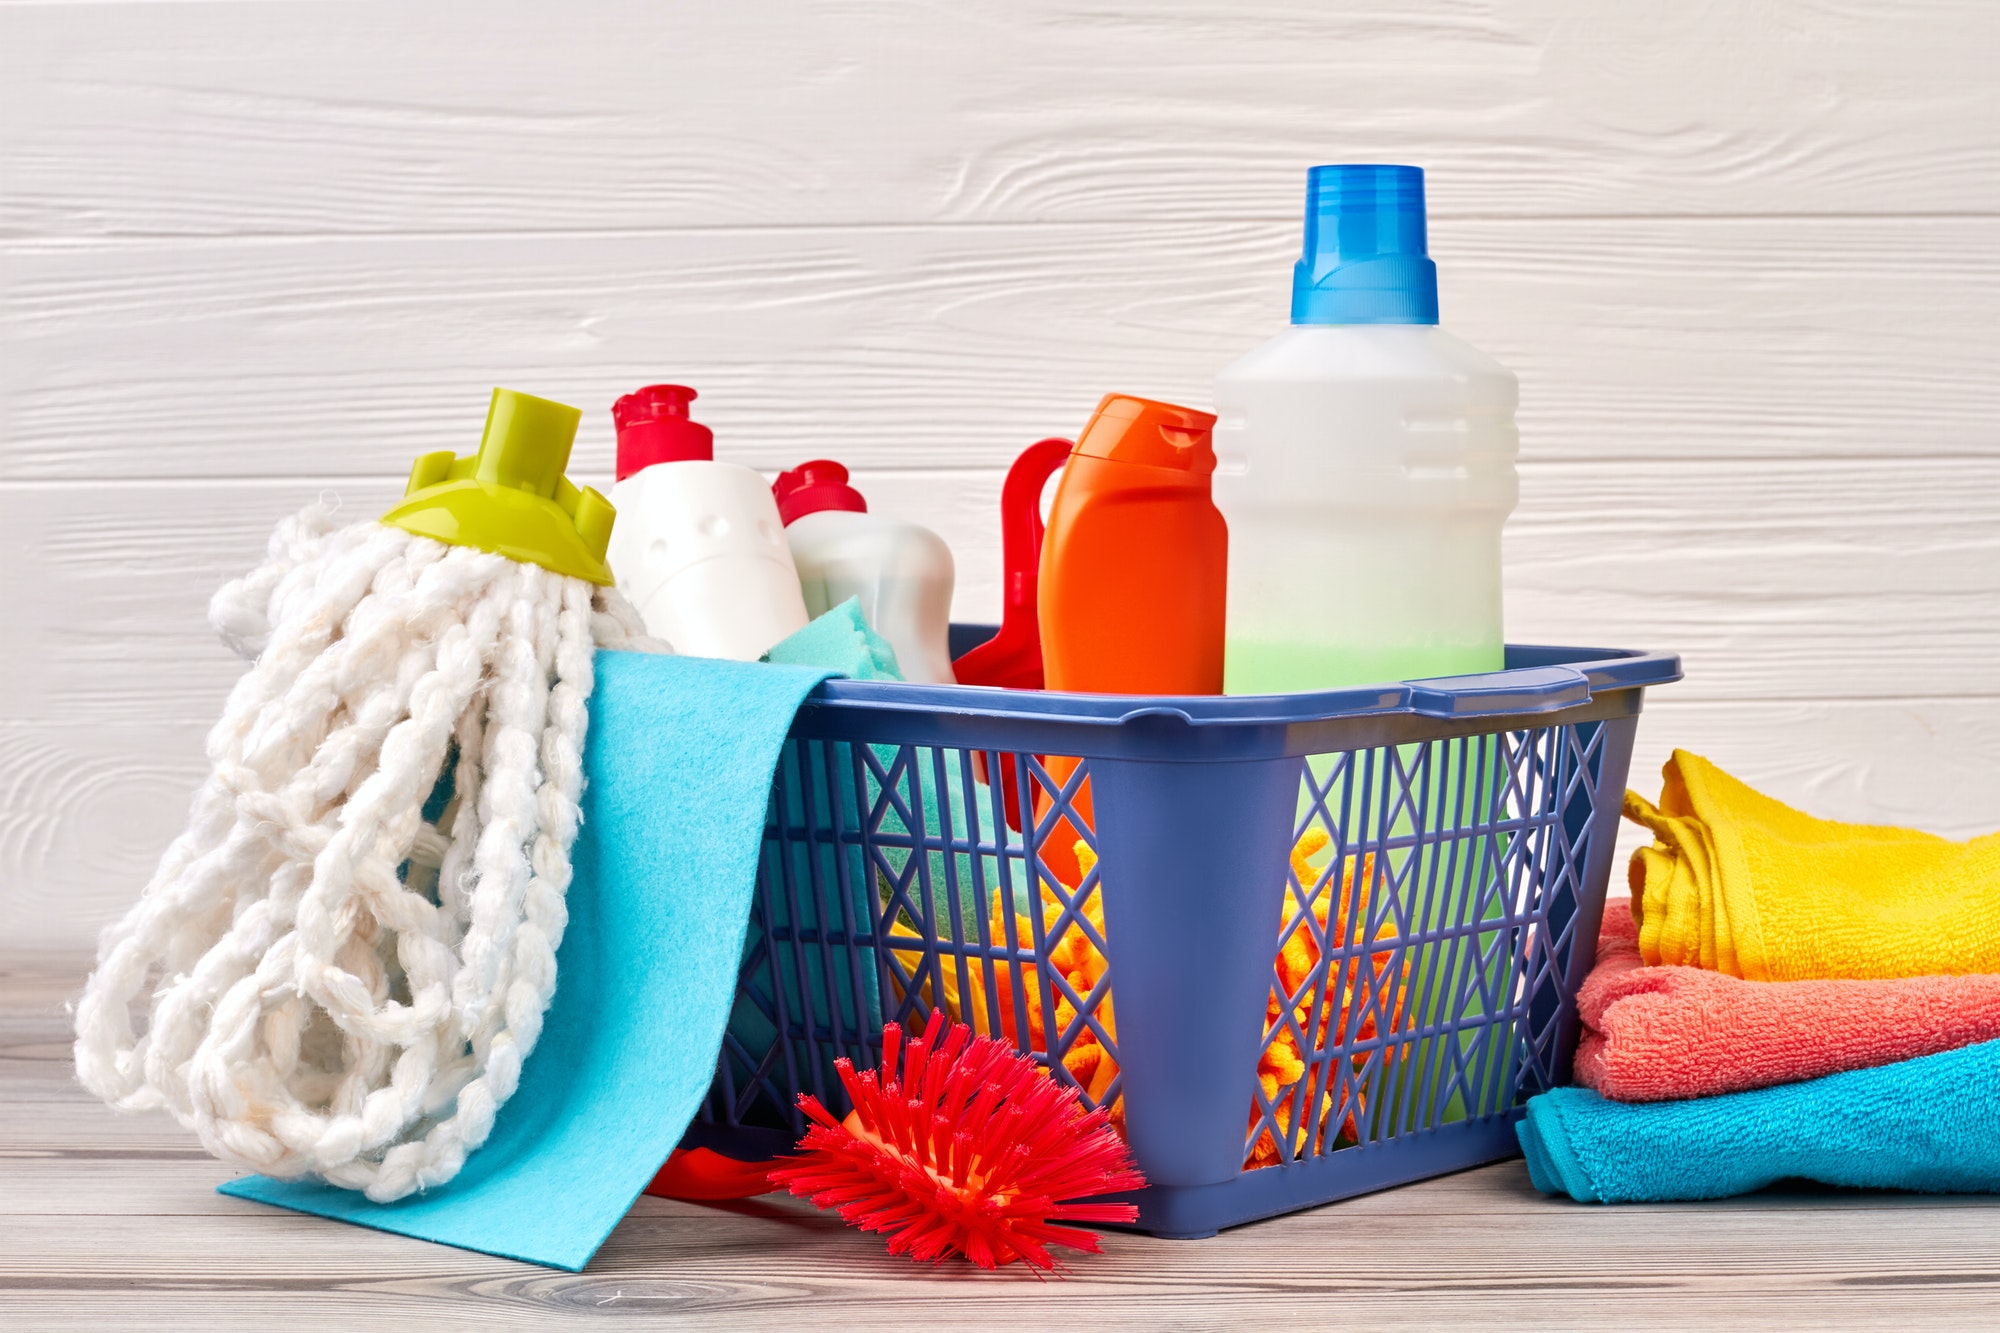 Chemical cleaning supplies in basket.